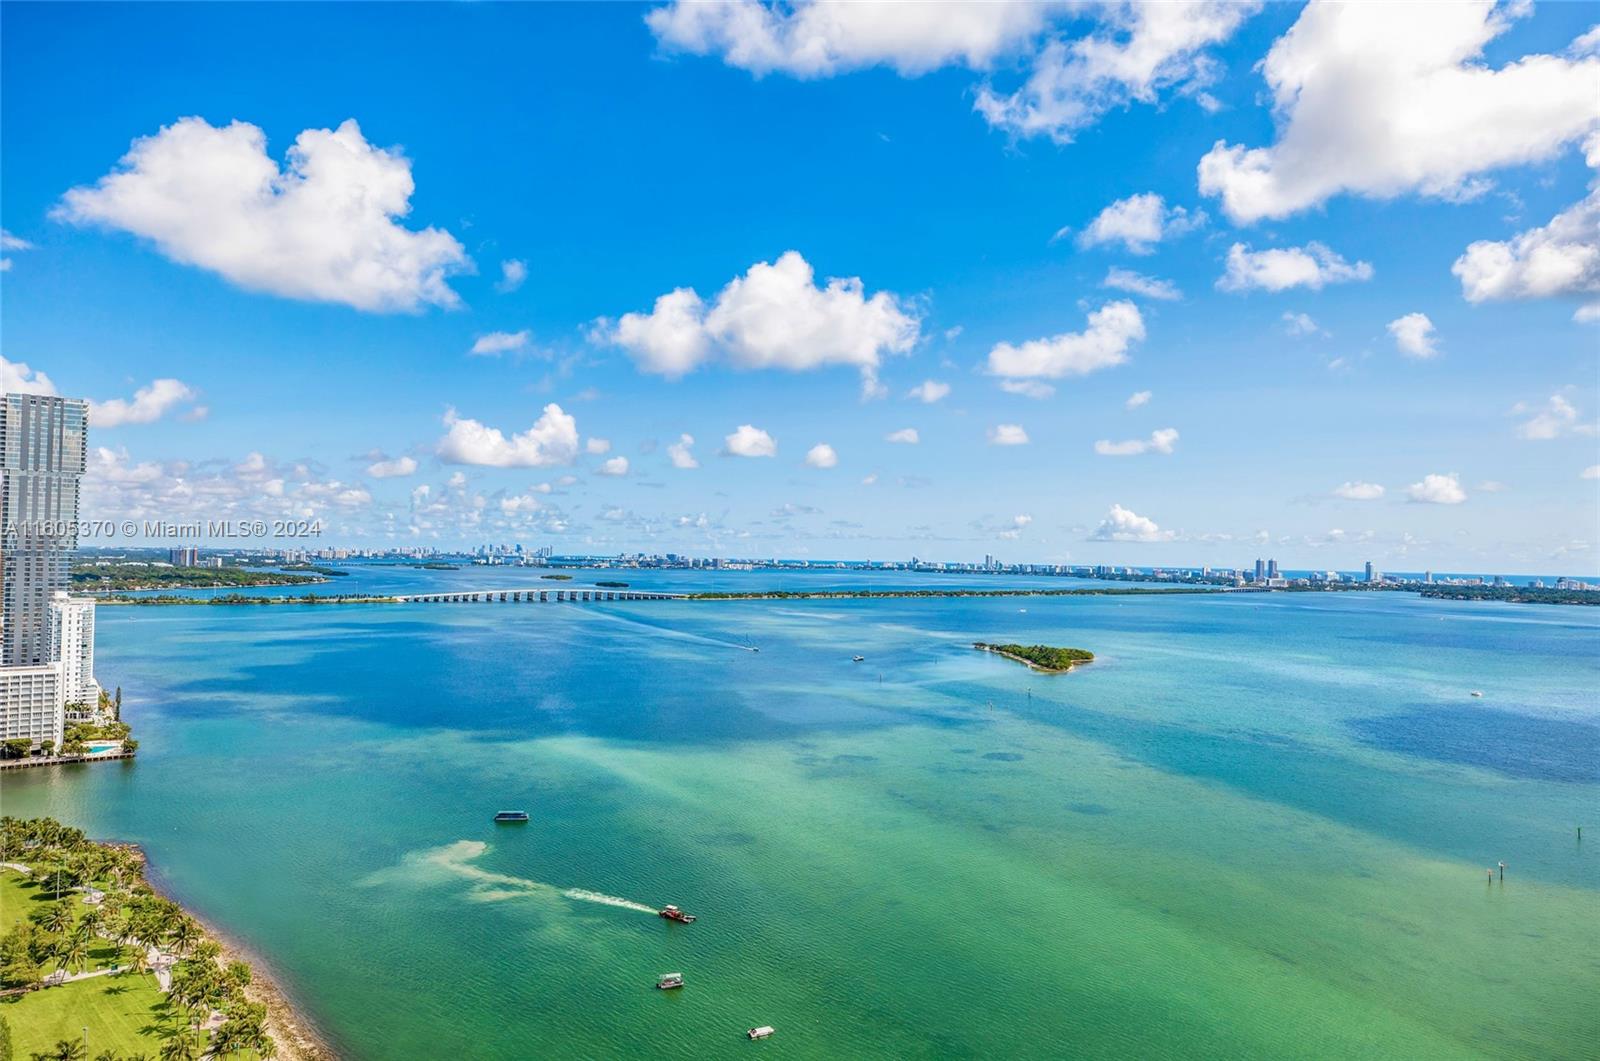 Experience the pinnacle of waterfront living in the fully renovated unit at The Grand, boasting the building's finest views. This spacious two-bedroom with den unit offers unobstructed vistas of Biscayne Bay and Miami Beach, complemented by new impact-resistant windows and doors, and sleek modern bathrooms. Its prime location is near Miami Beach, Brickell, Downtown, Wynwood, and The Design District, with new dining spots like Klaw and Casadonna just a short distance away. The Grand features a plethora of dining and shopping options right in the lobby, along with round-the-clock concierge, valet, and security services.